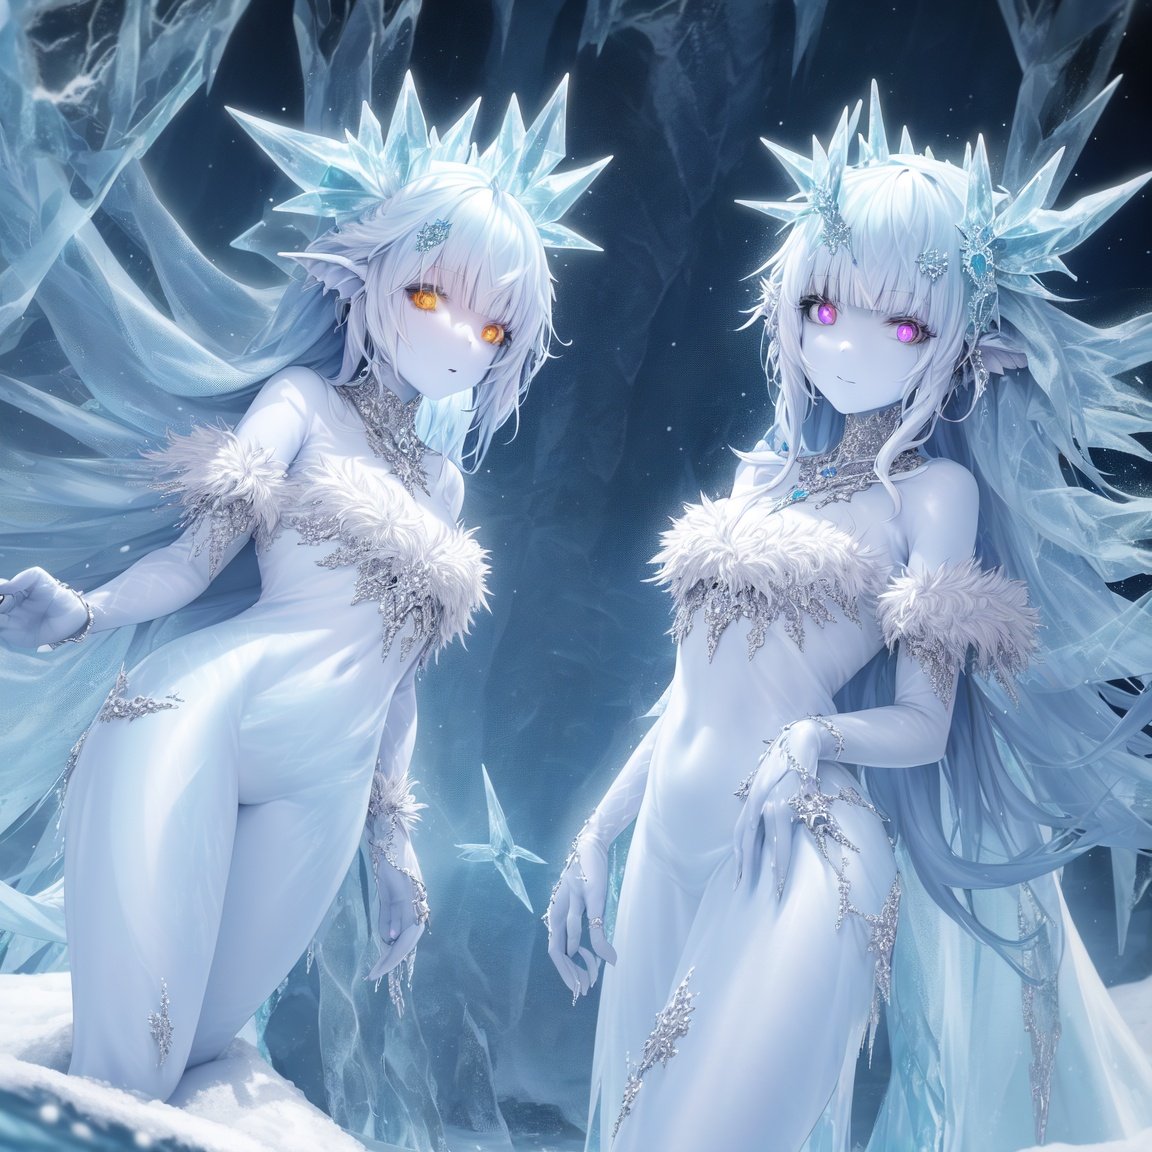 Image of (monster girl make of ice sharps)++, (skin made of ice)+, (ice sharps)+, (translucent skin)++, (reflecting lights)+++, snowy forest, snowflakes